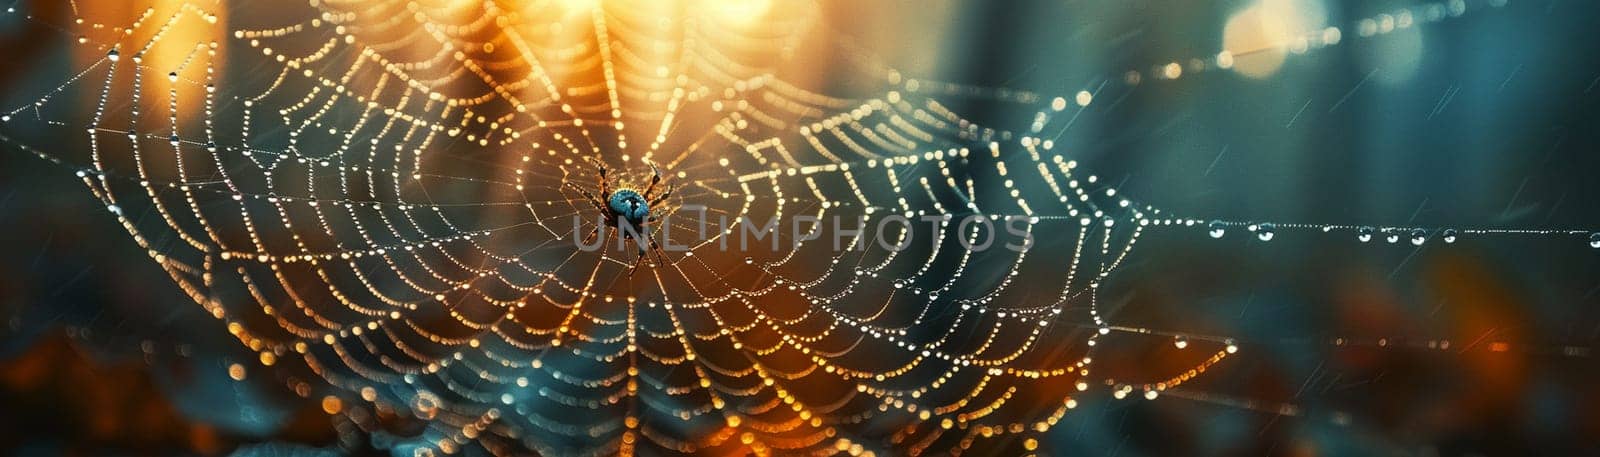 Morning dew on a spider web, capturing the intricate beauty of nature's design